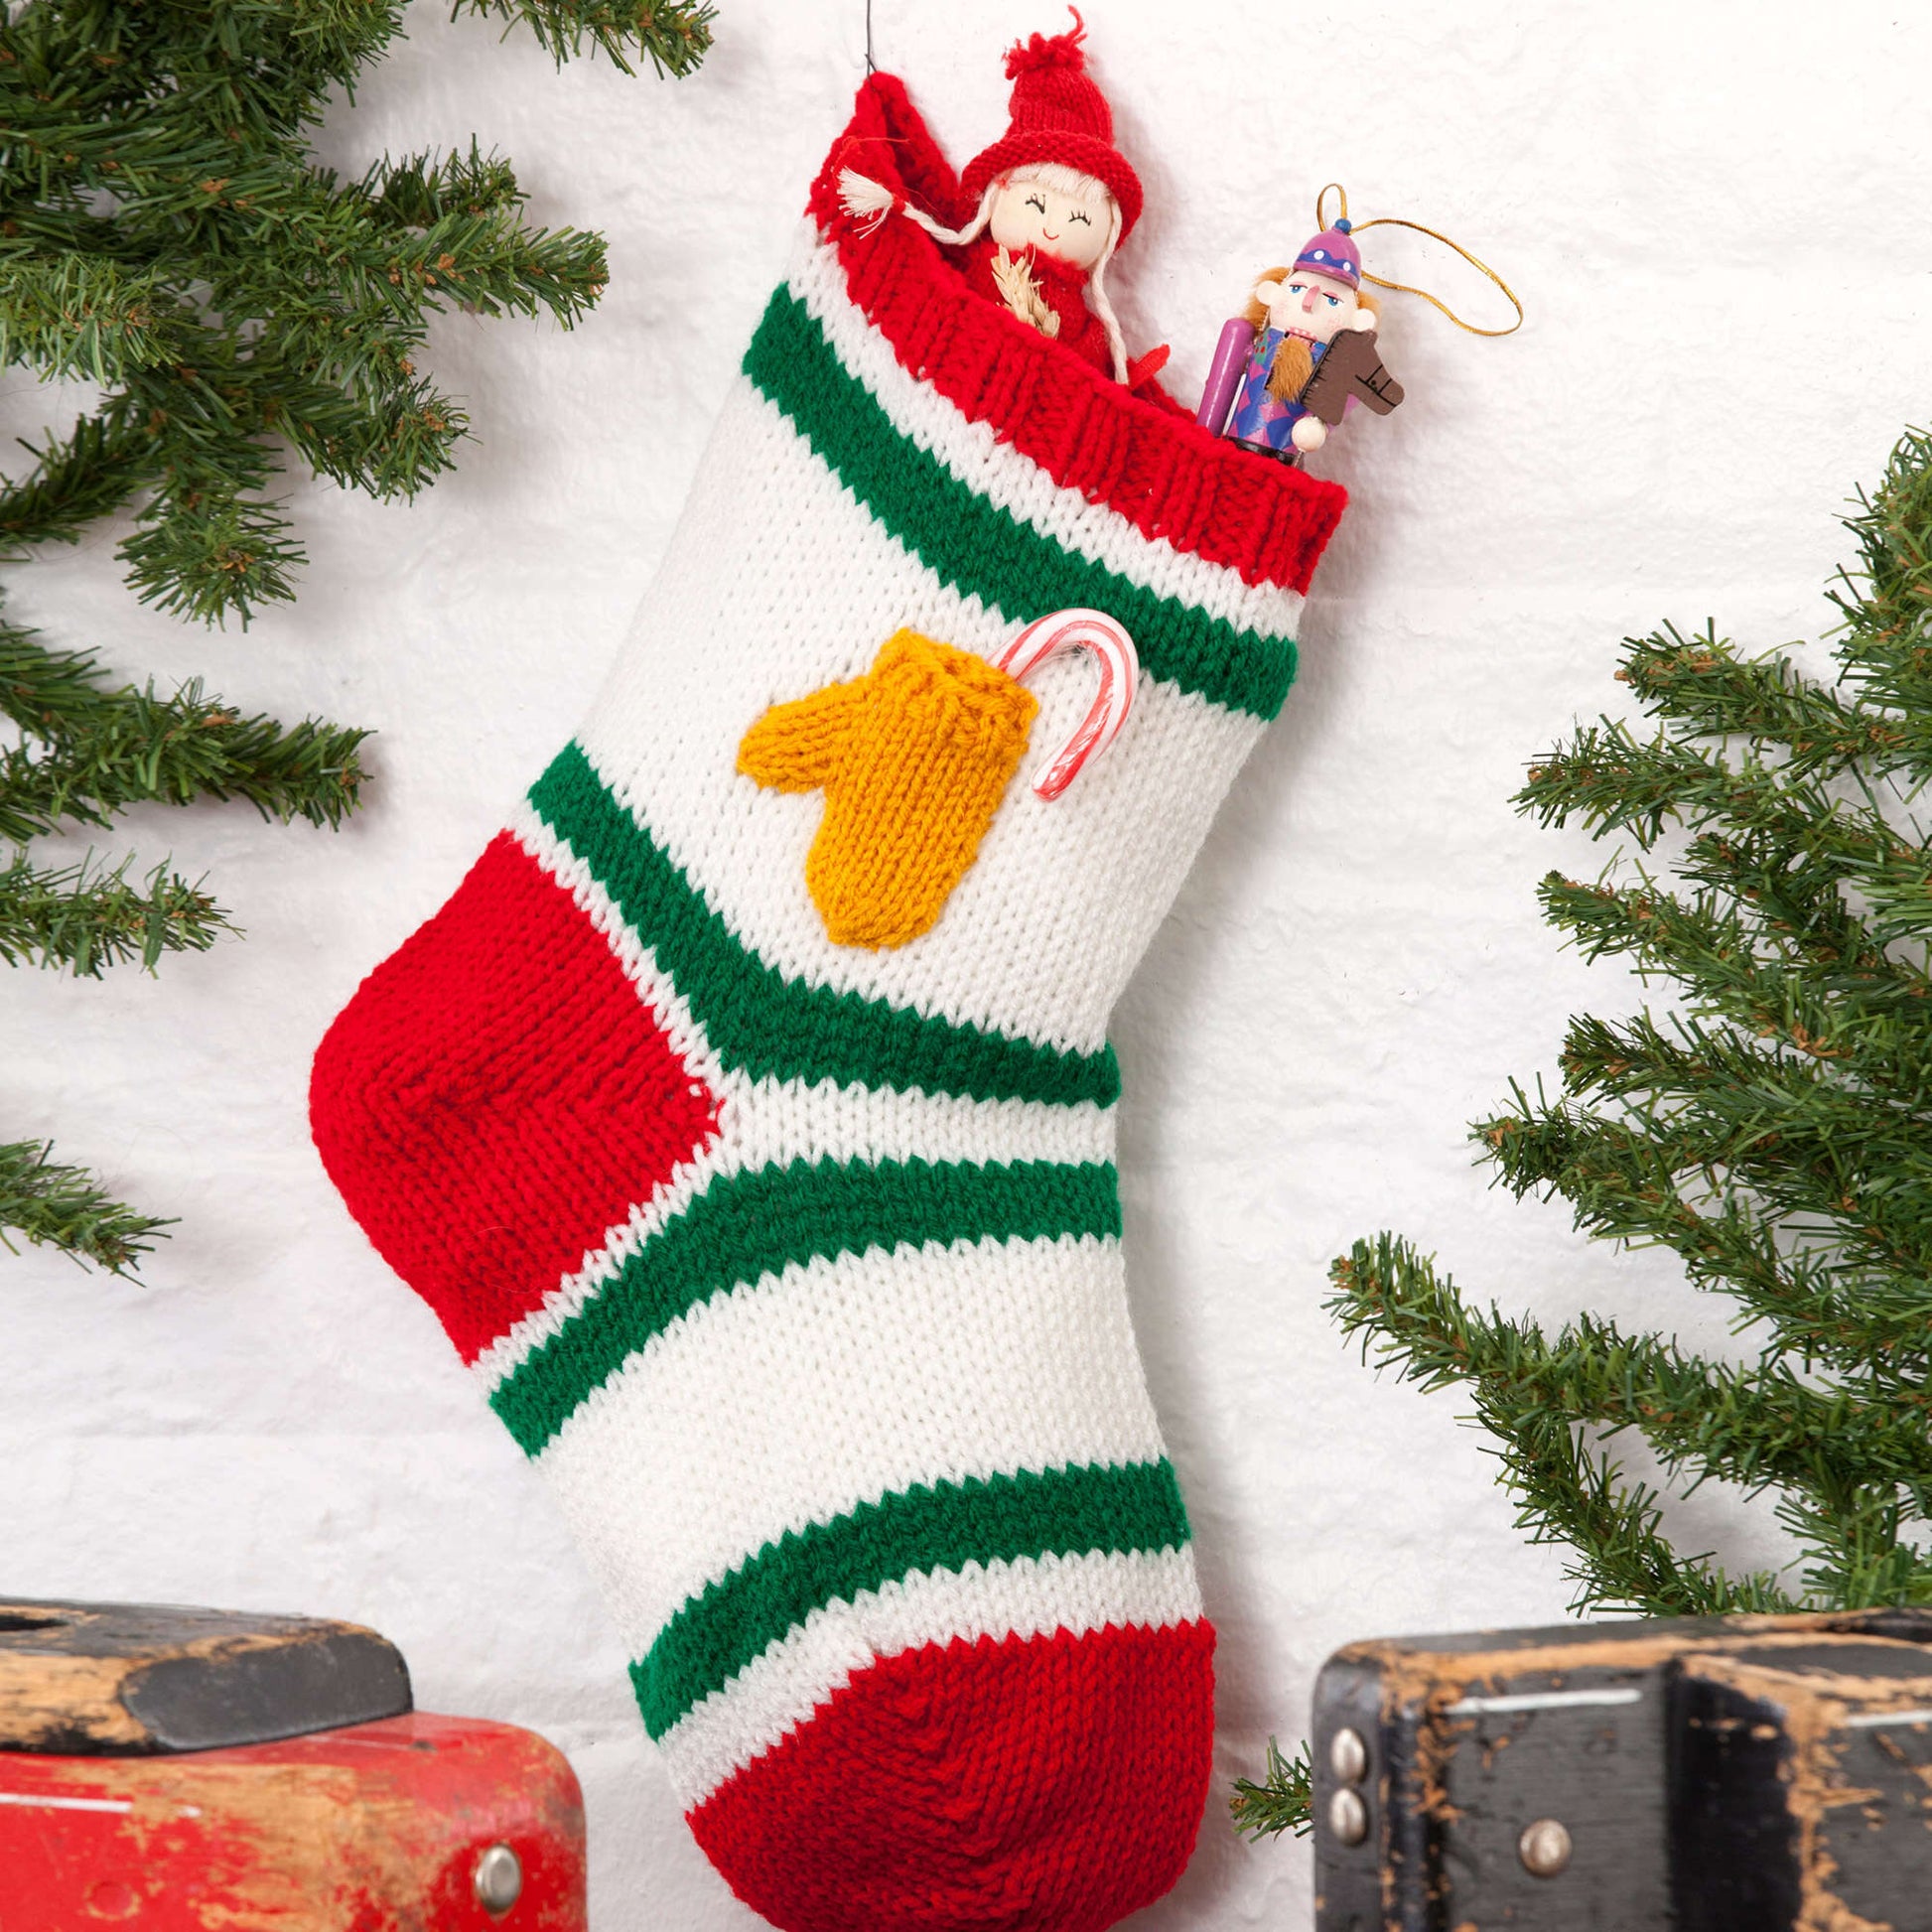 Red Heart Holiday Stocking With Mitten Pocket Red Heart Holiday Stocking With Mitten Pocket